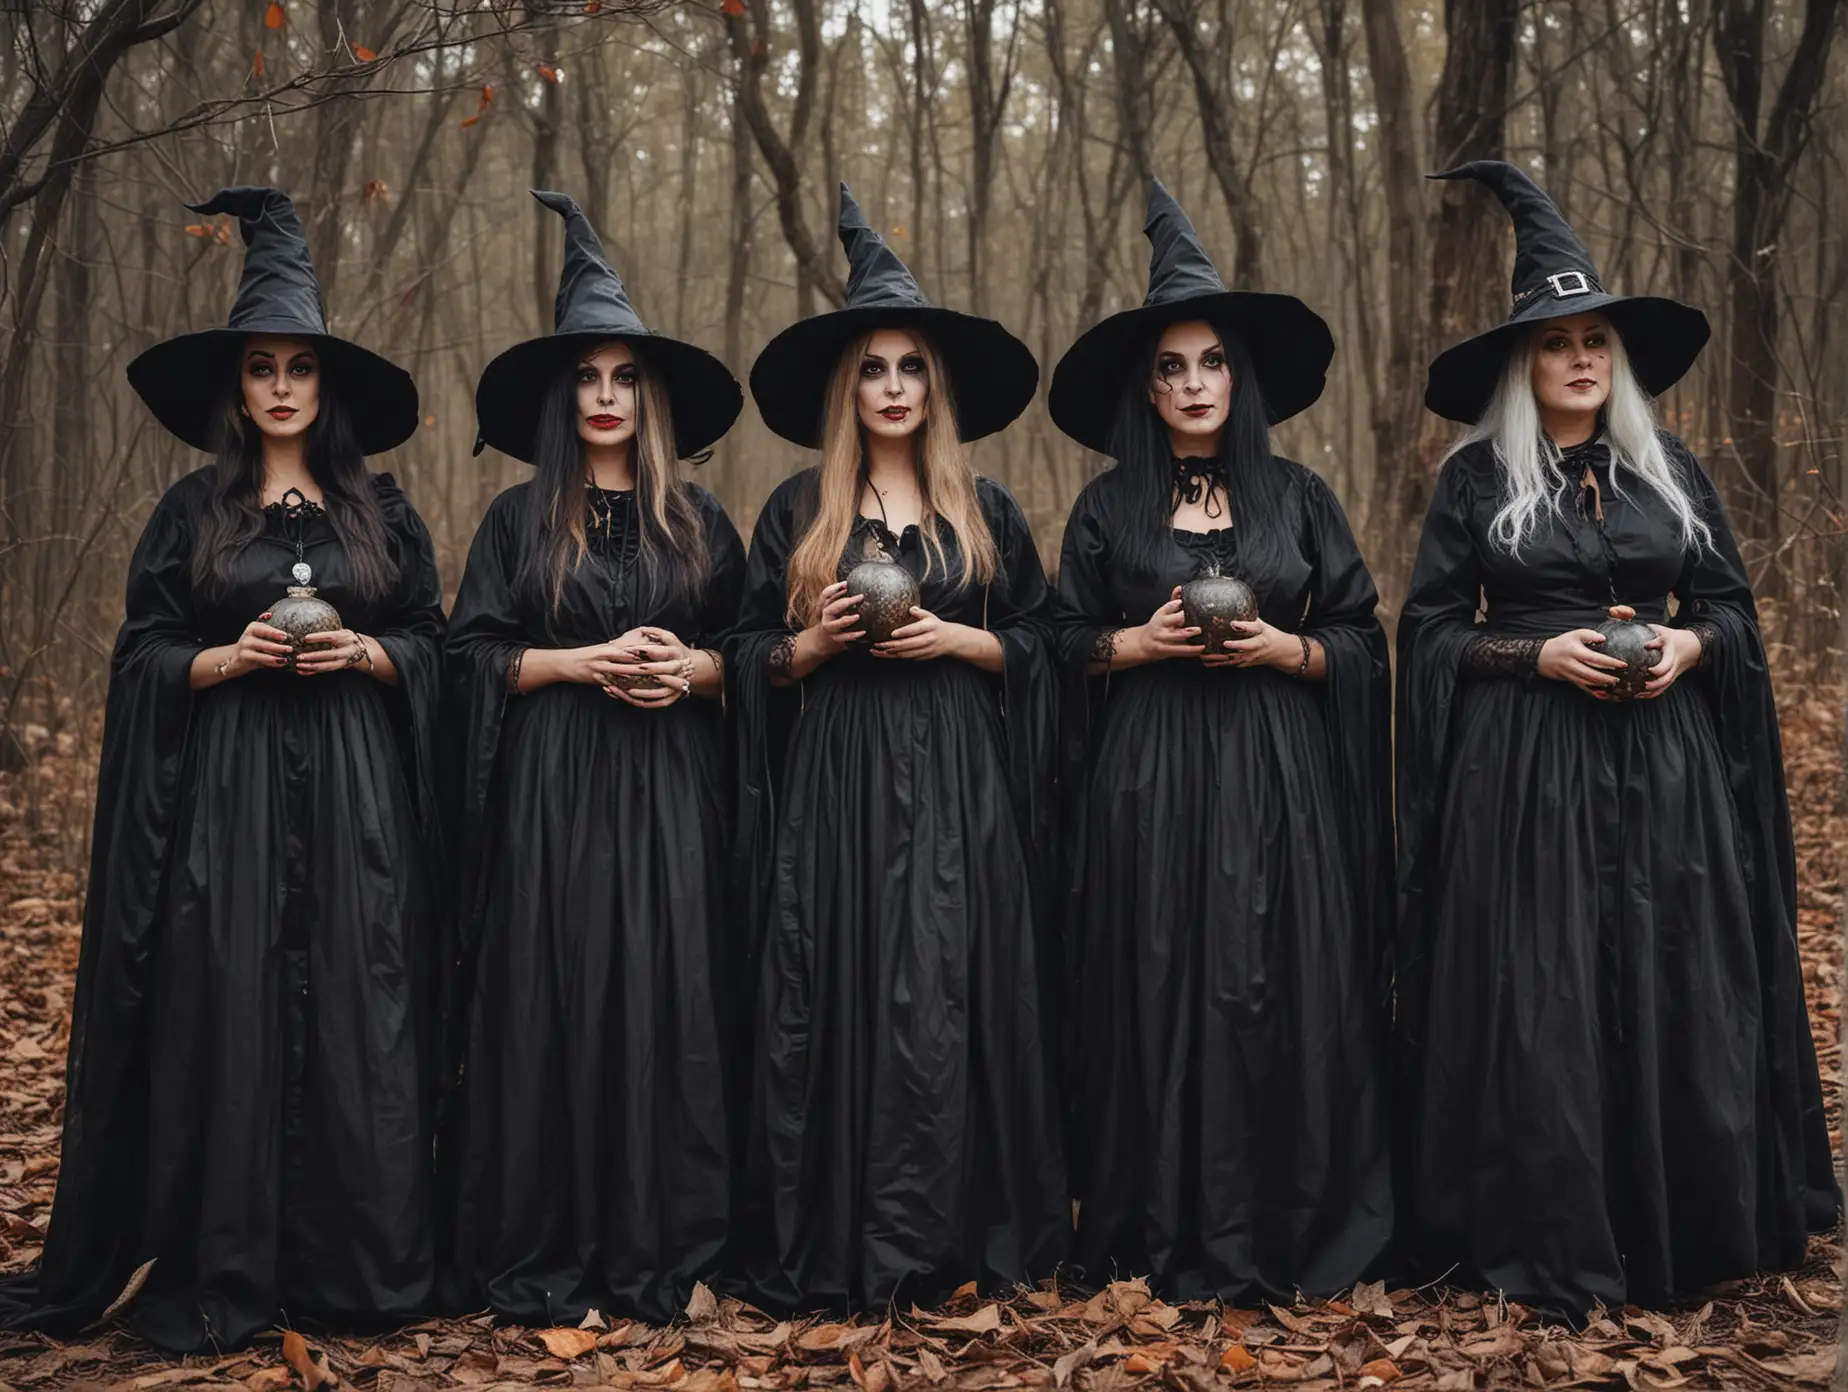 Witches in Costume Celebrating Halloween Night